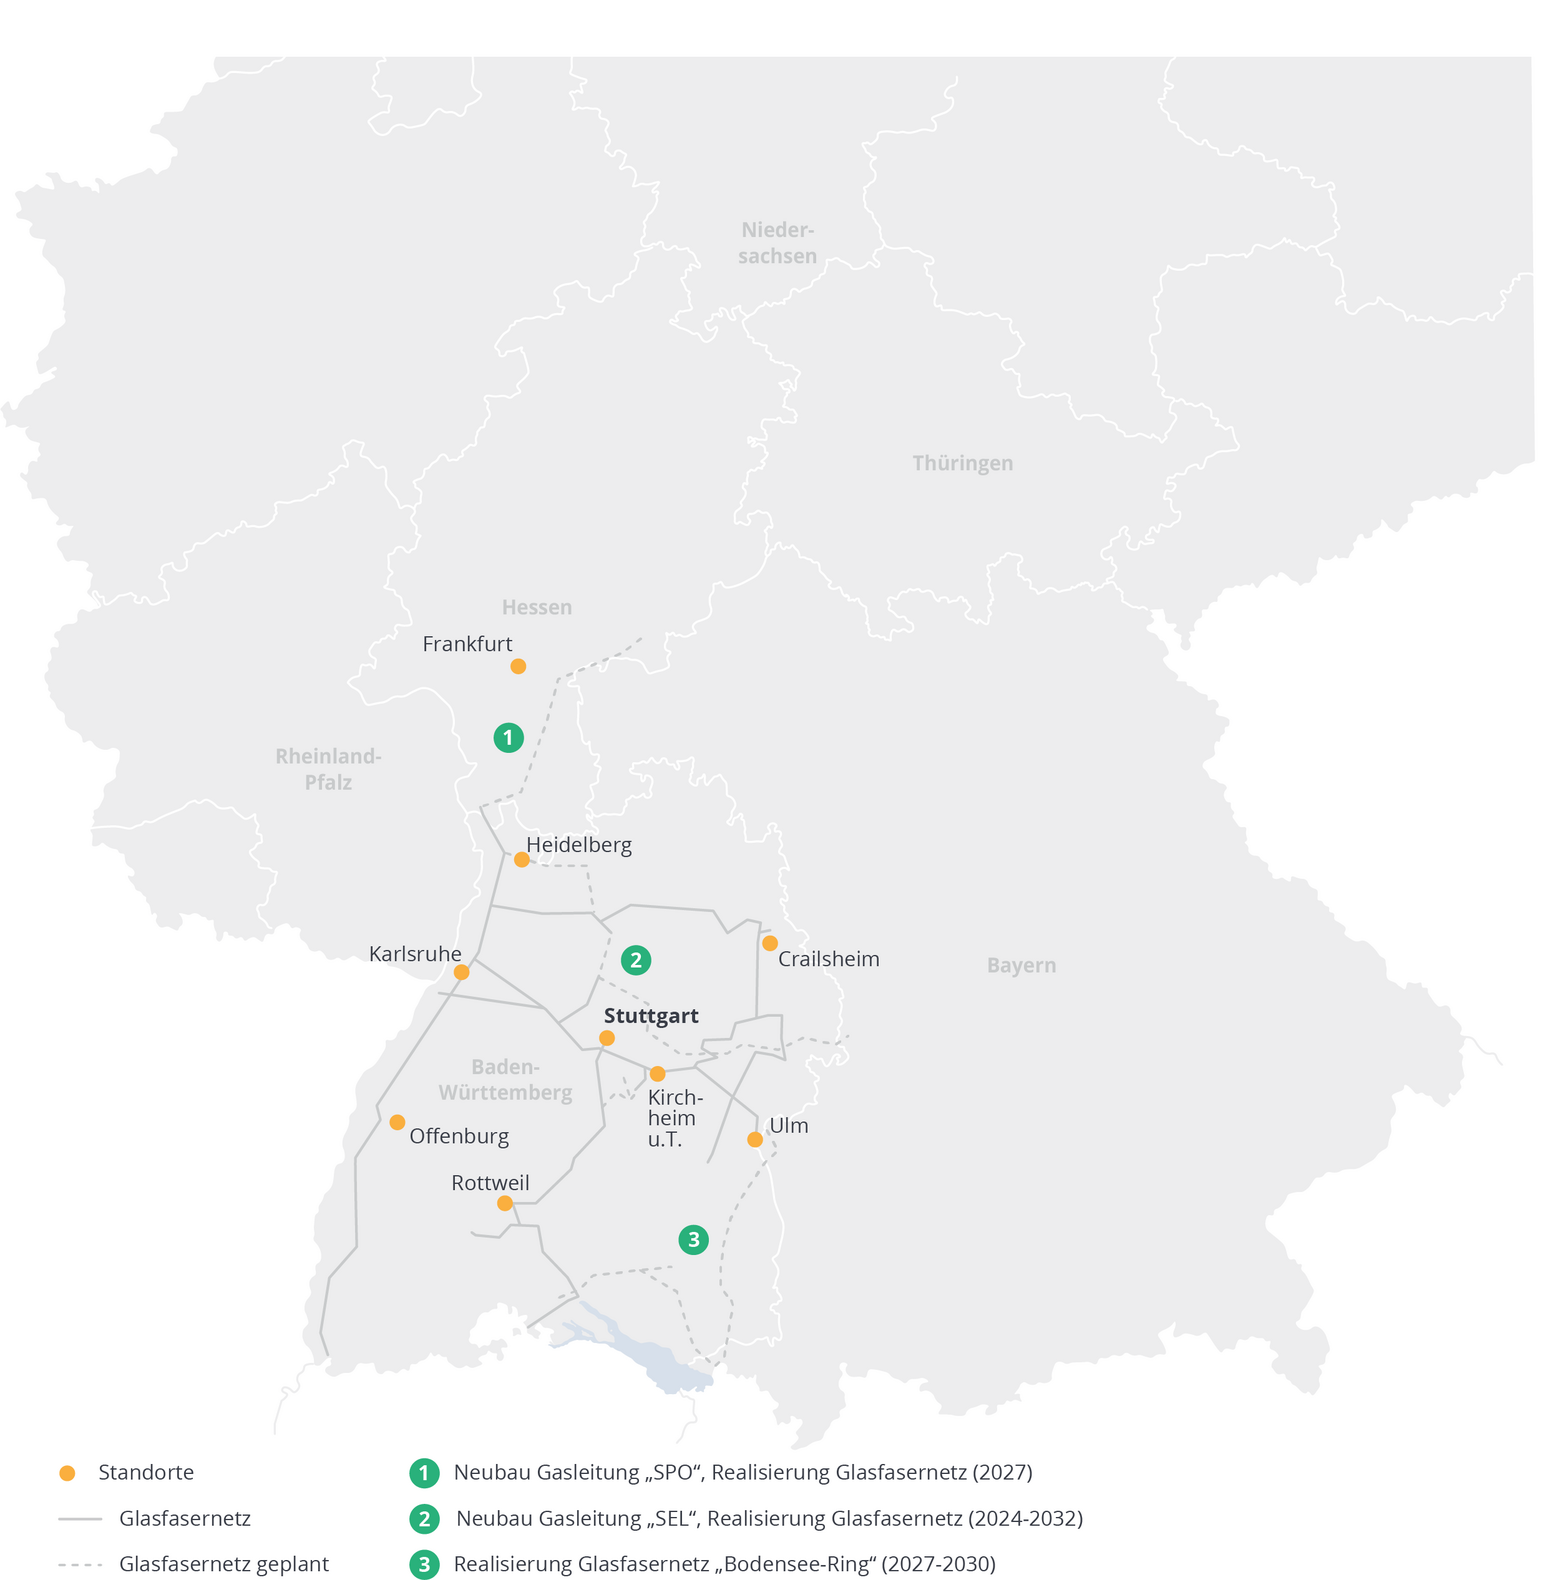 Map of the telecommunications network for Baden-Württemberg